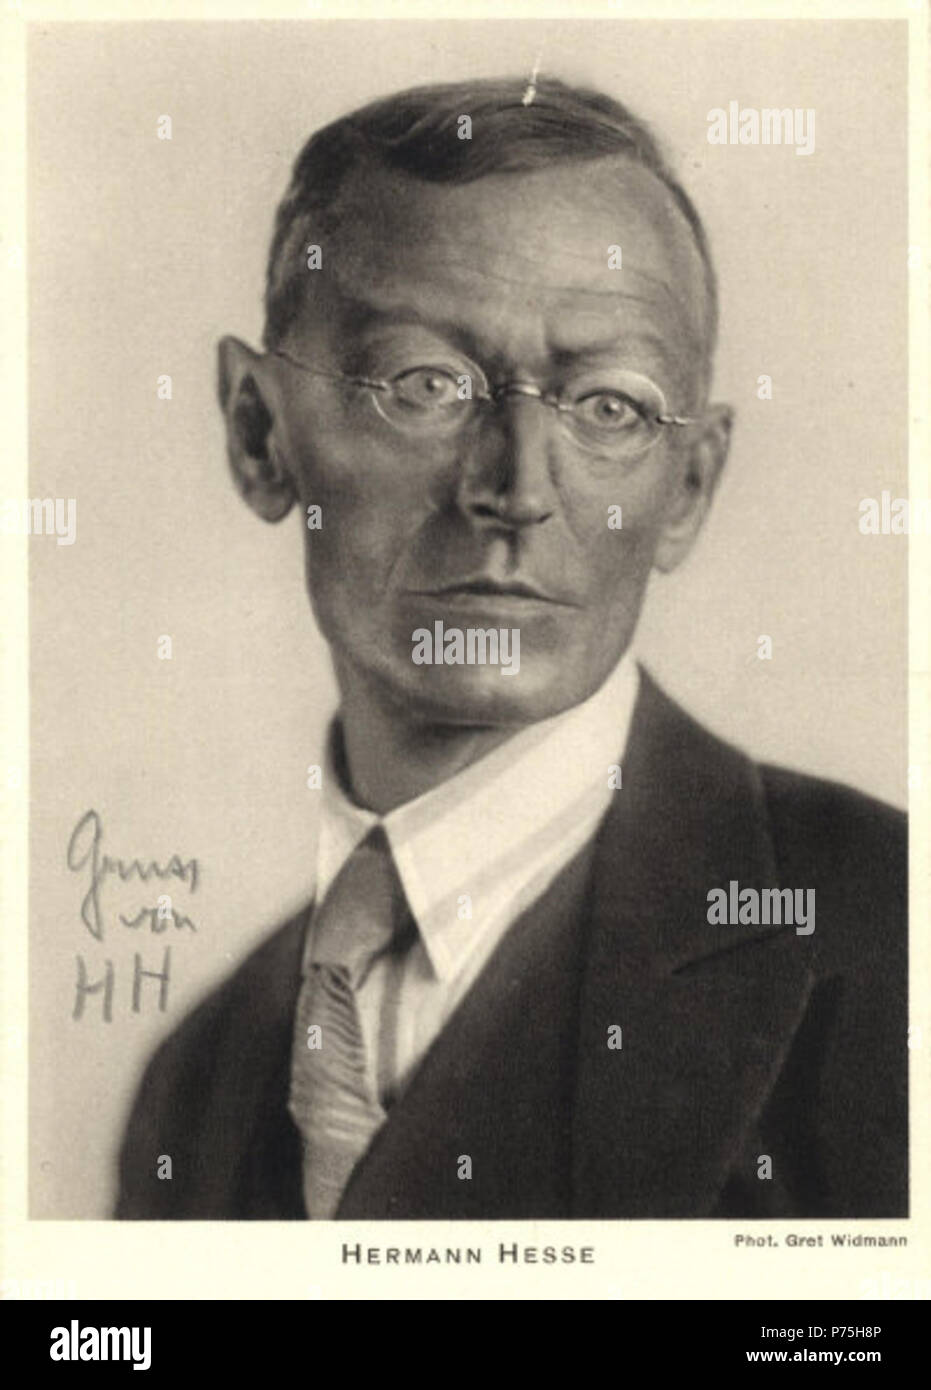 English: Signed 4 x 6 postcard with photograph of German author Hermann Hesse in a head and shoulders pose. Photograph by Gret Widmann. Signed by Hesse in bold pencil to a light area of the background, 'Gruss von H H'. before 1931 140 Hermann Hesse Autograph Photo Gret Widmann Stock Photo